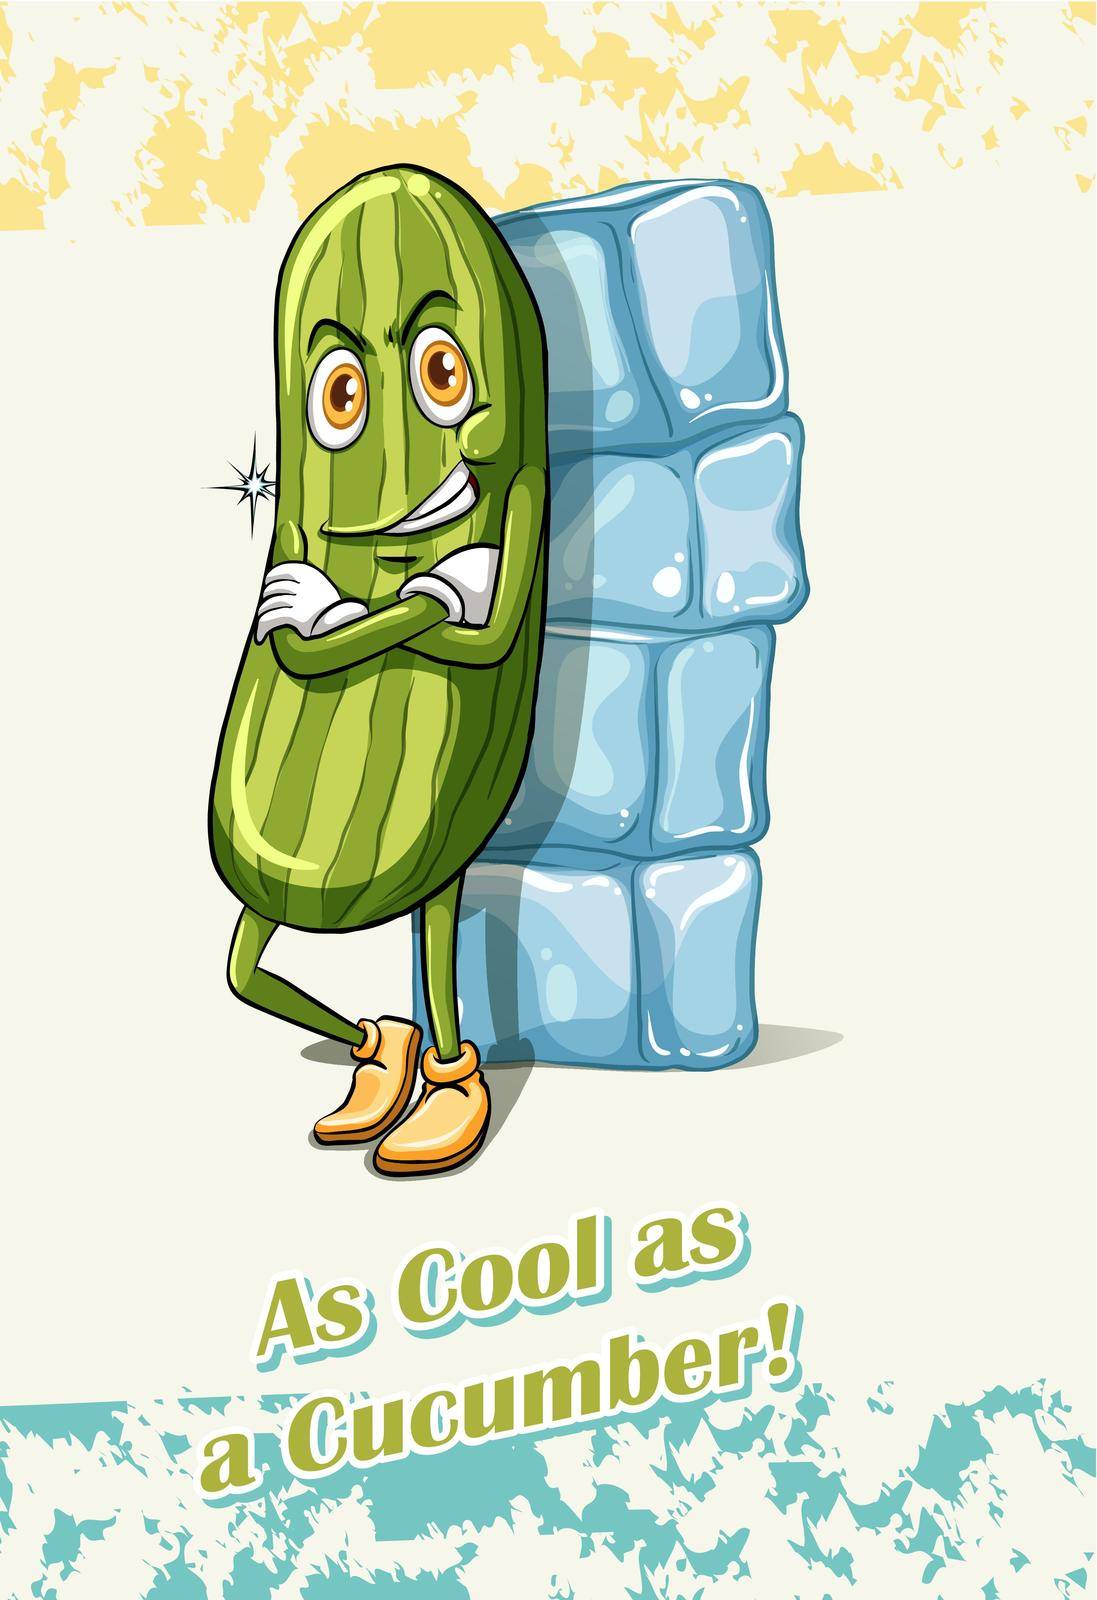 As cool as a cucumber illustration